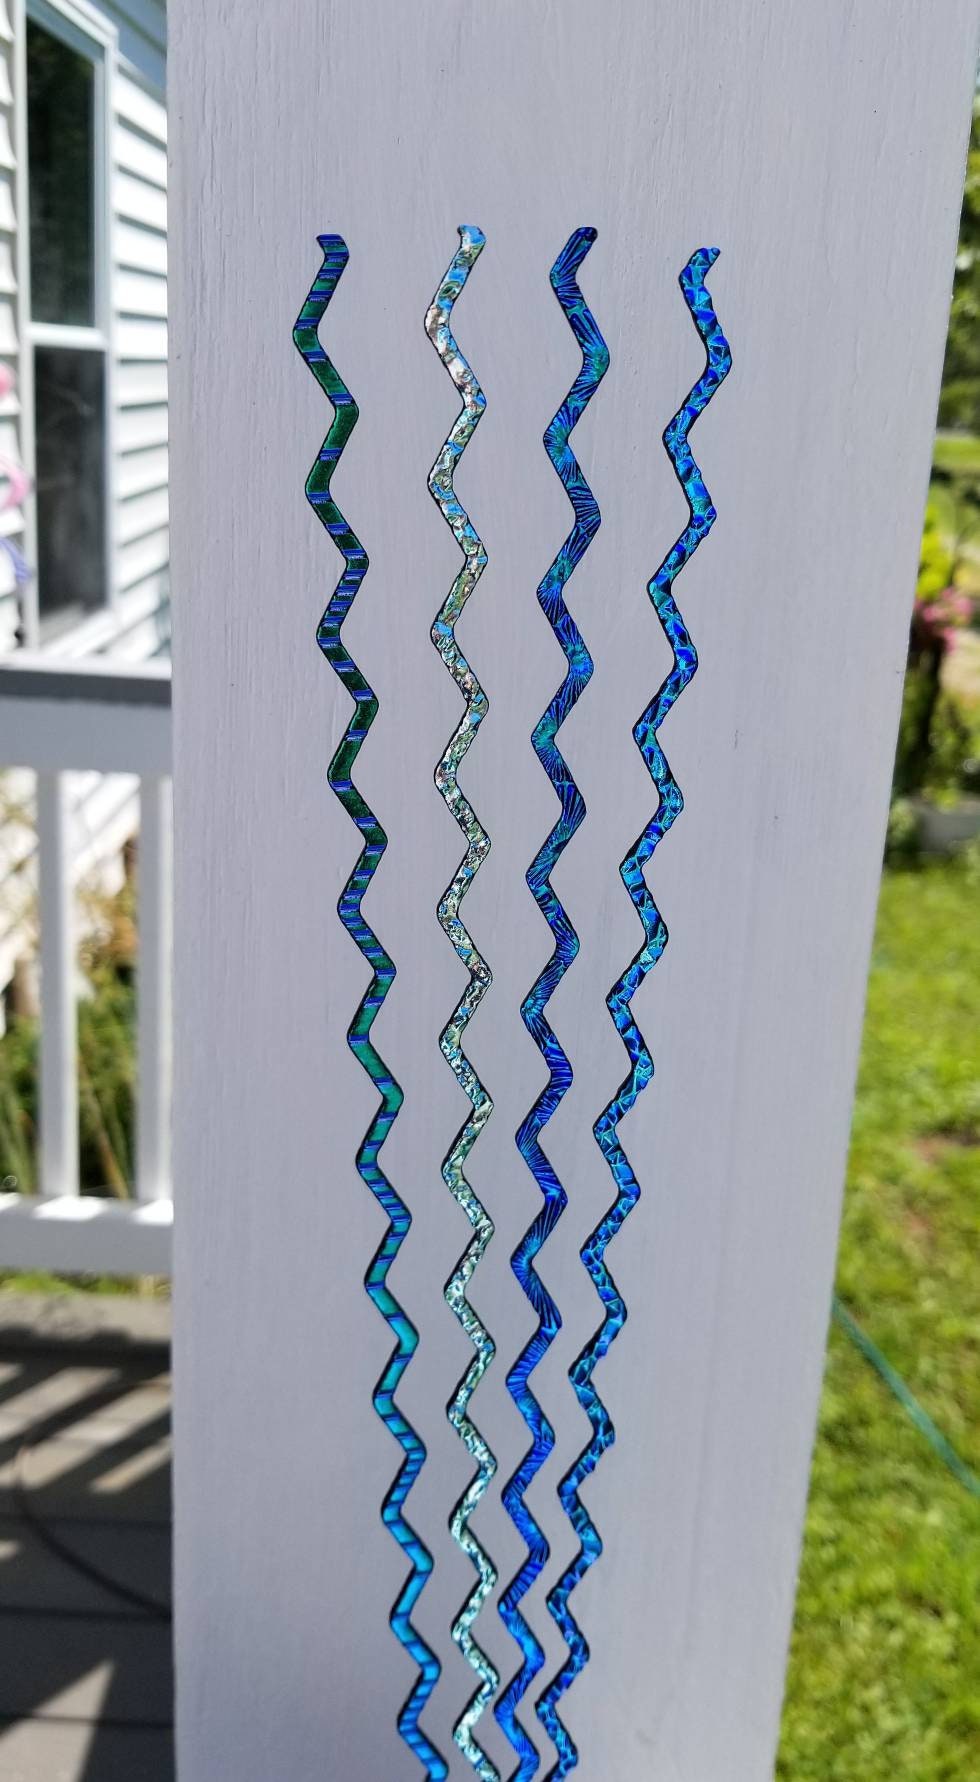 Dichroic Sheet Glass. Bright Blues on Wavy Black Glass. 4 pieces, each 8" long. Coe 90 Fusible Glass. Jewelry accessories or mosaic crafts.